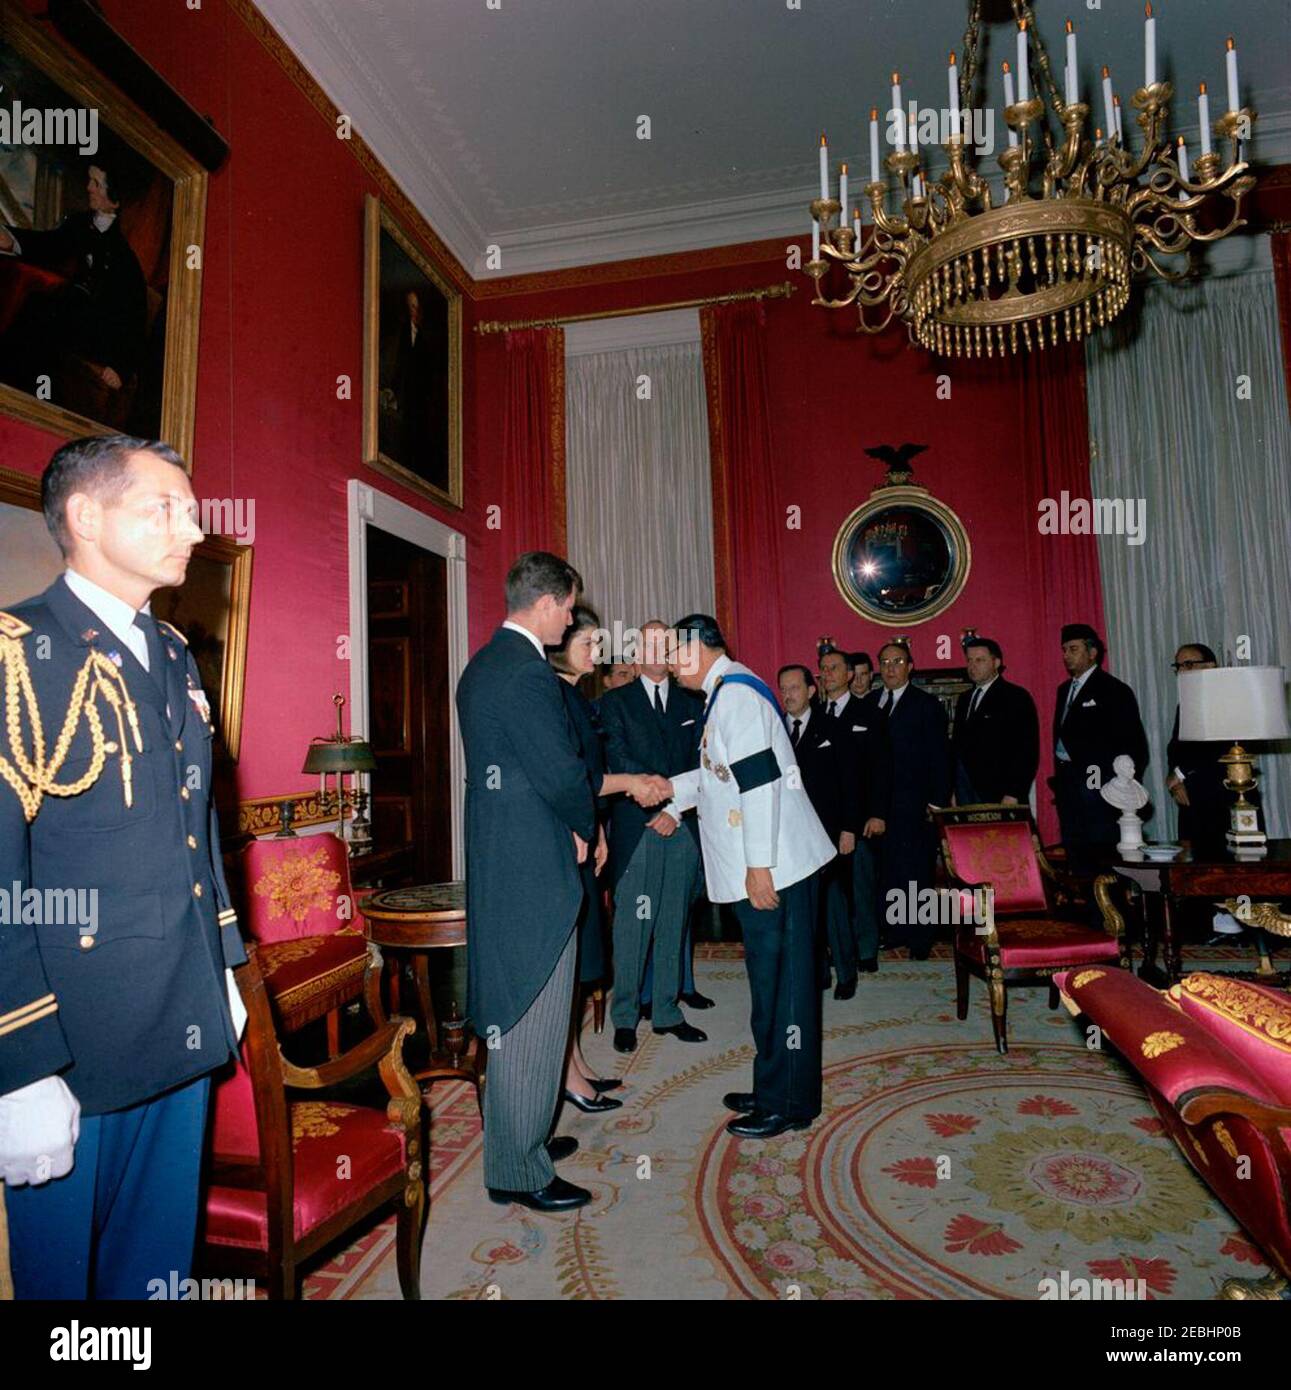 State Funeral of President Kennedy: White House, post funeral Reception. Jacqueline Kennedy and Senator Edward M. Kennedy (Massachusetts) greet guests during a reception at the White House, following the state funeral of President John F. Kennedy; Mrs. Kennedy shakes hands with an unidentified man. Also pictured: Minister of Foreign Relations of El Salvador, Dr. Hector Escobar Serrano; Minister of Foreign Affairs of Pakistan, Zulfikar Ali Bhutto; Ambassador of Pakistan, Ghulam Ahmed; U.S. Chief of Protocol, Angier Biddle Duke; Air Force Aide to President Kennedy, Brigadier General Godfrey T. M Stock Photo